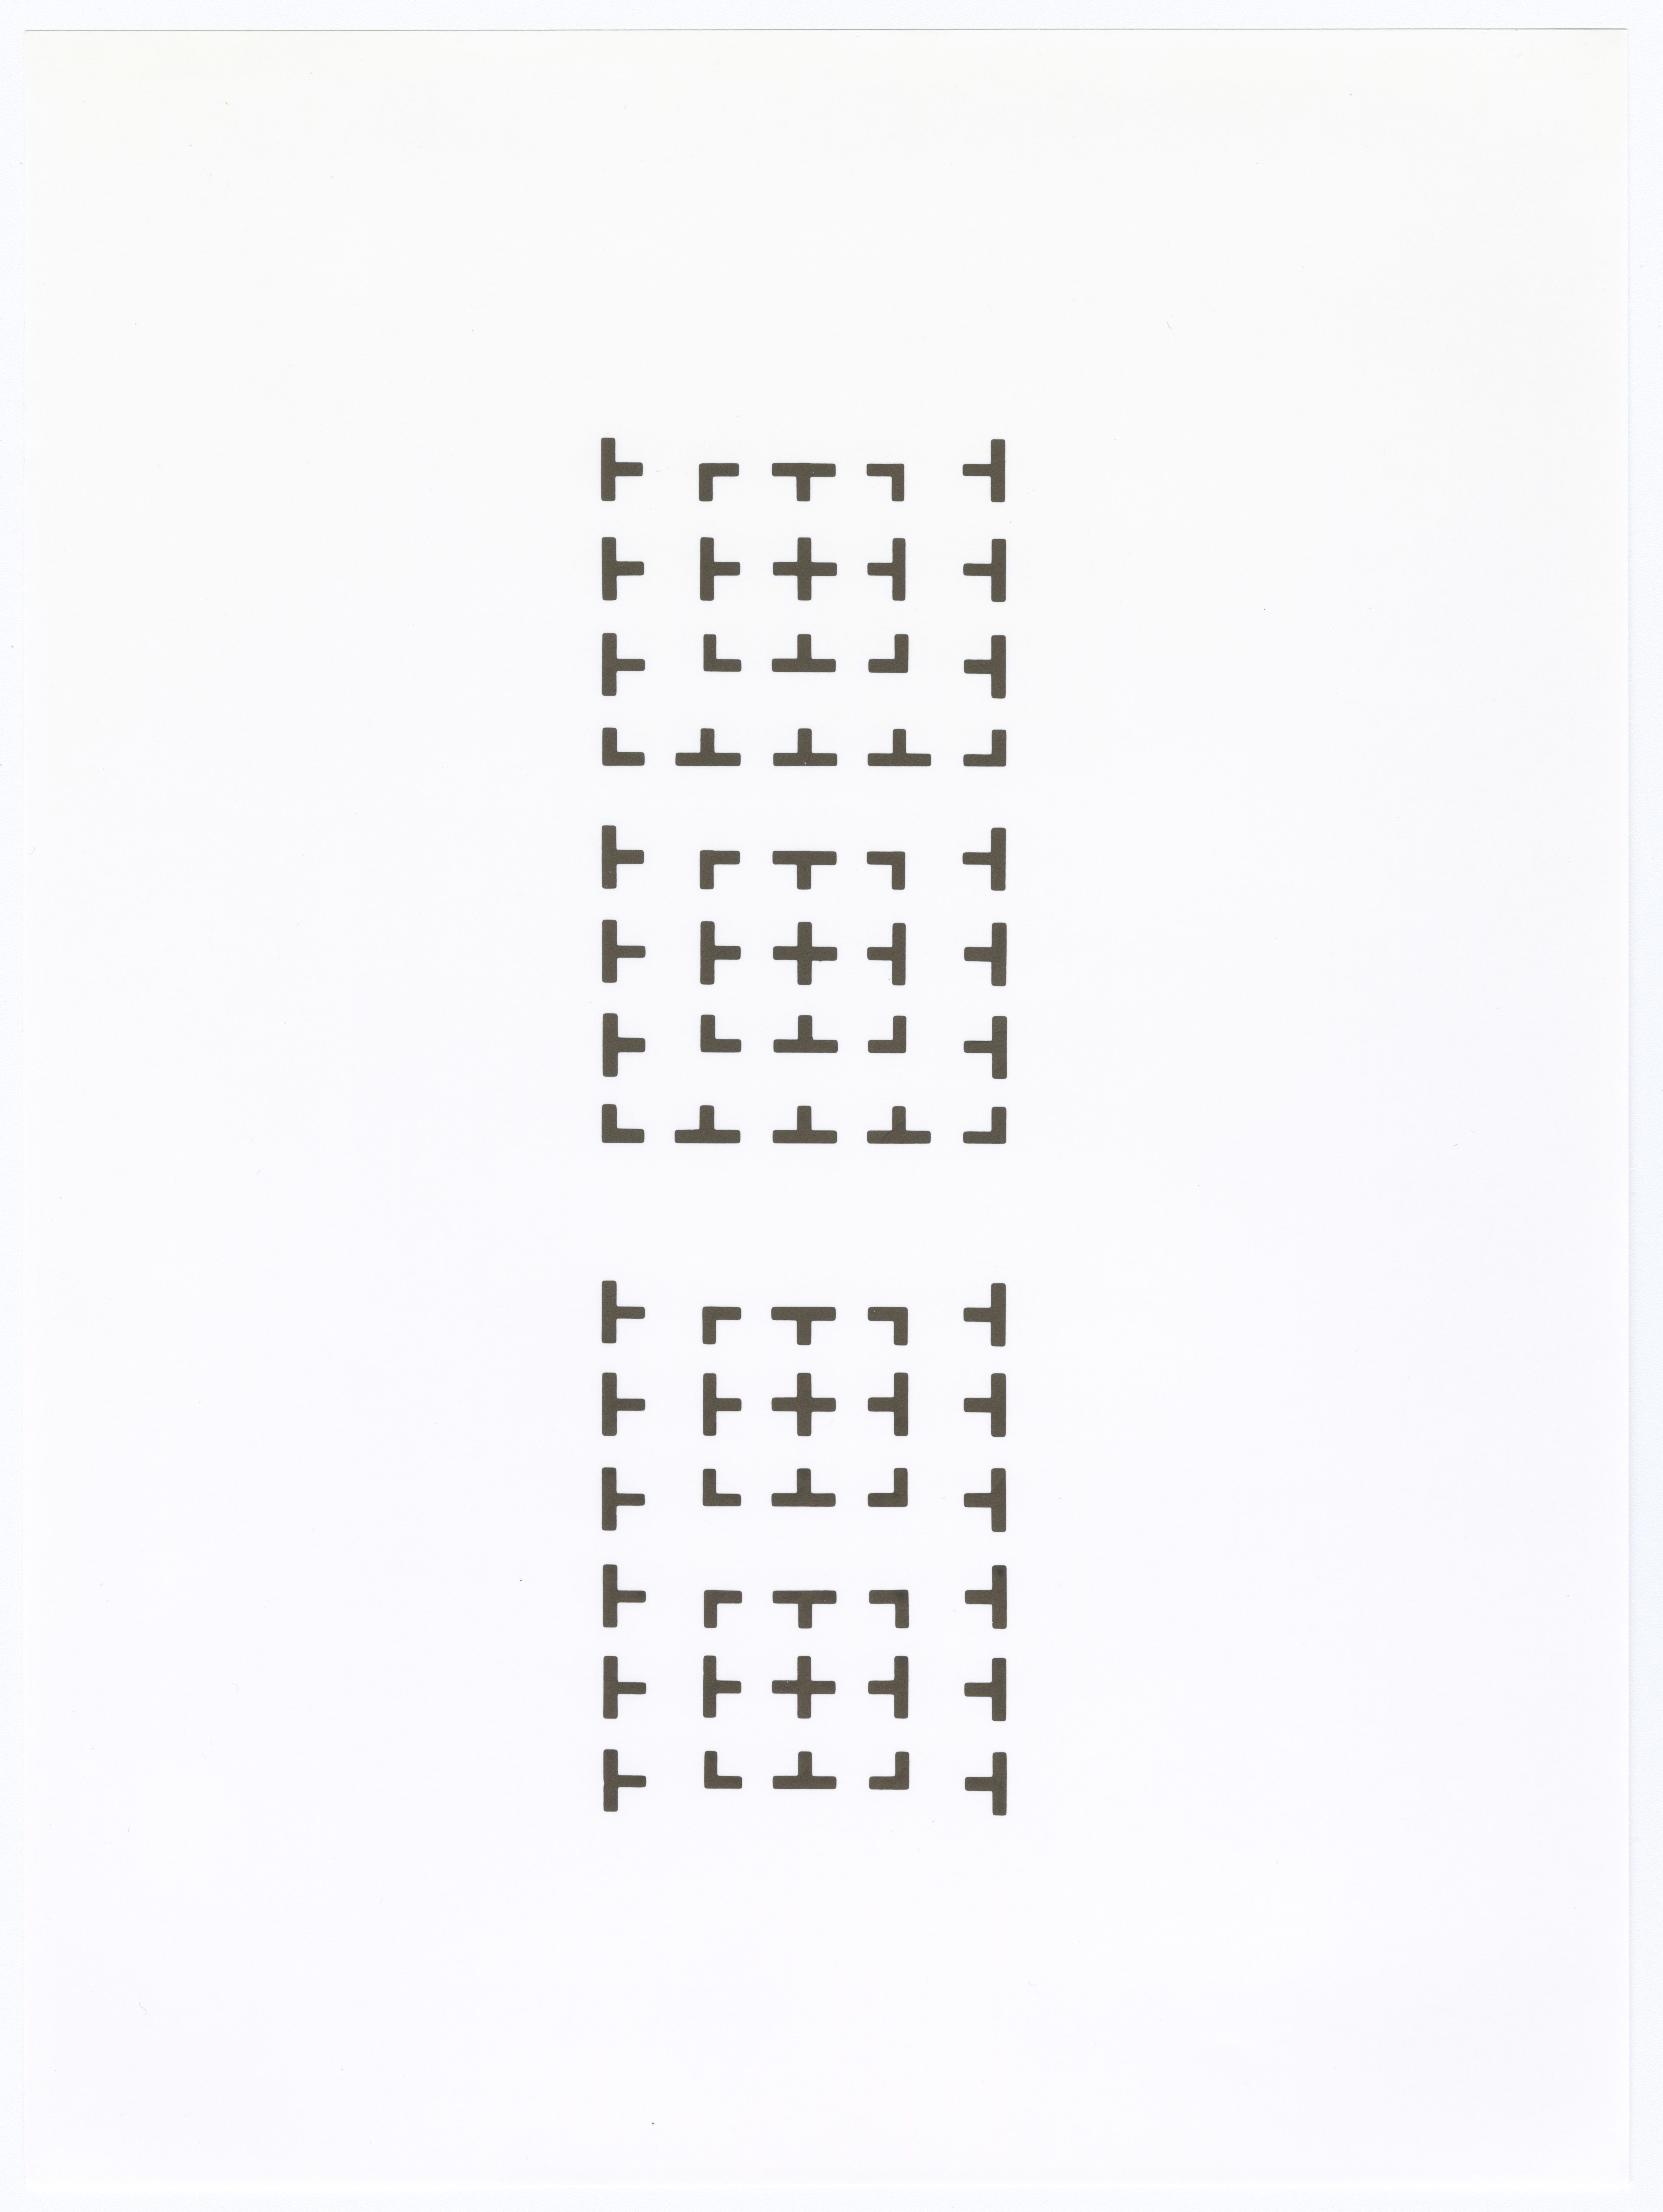 Image of the visual poem "Moonshot Sonnet," which uses no words. It is composed of the crosshatched grid of a Réseau plate from the Ranger 7 moon photographs in the octave and sestet of a Petrarchan sonnet.